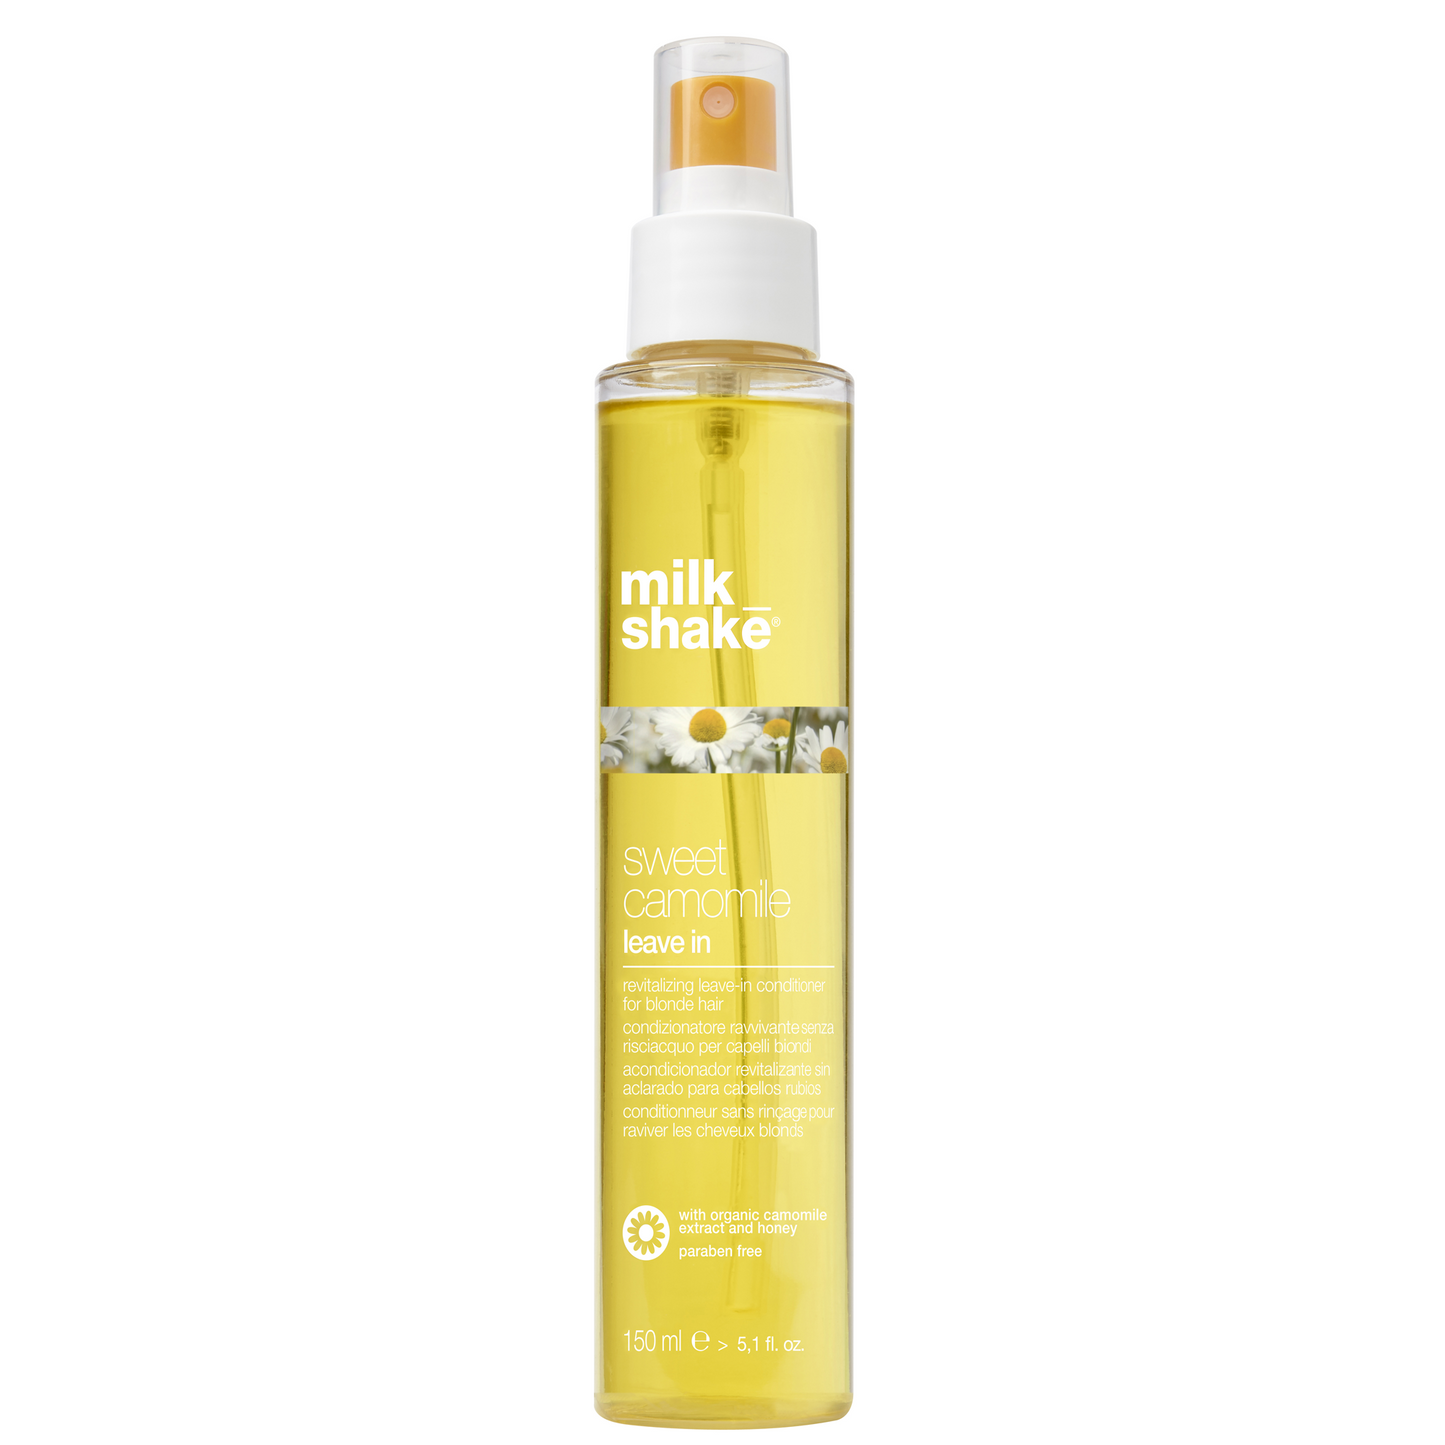 Sweet Camomile Leave-in Conditioner